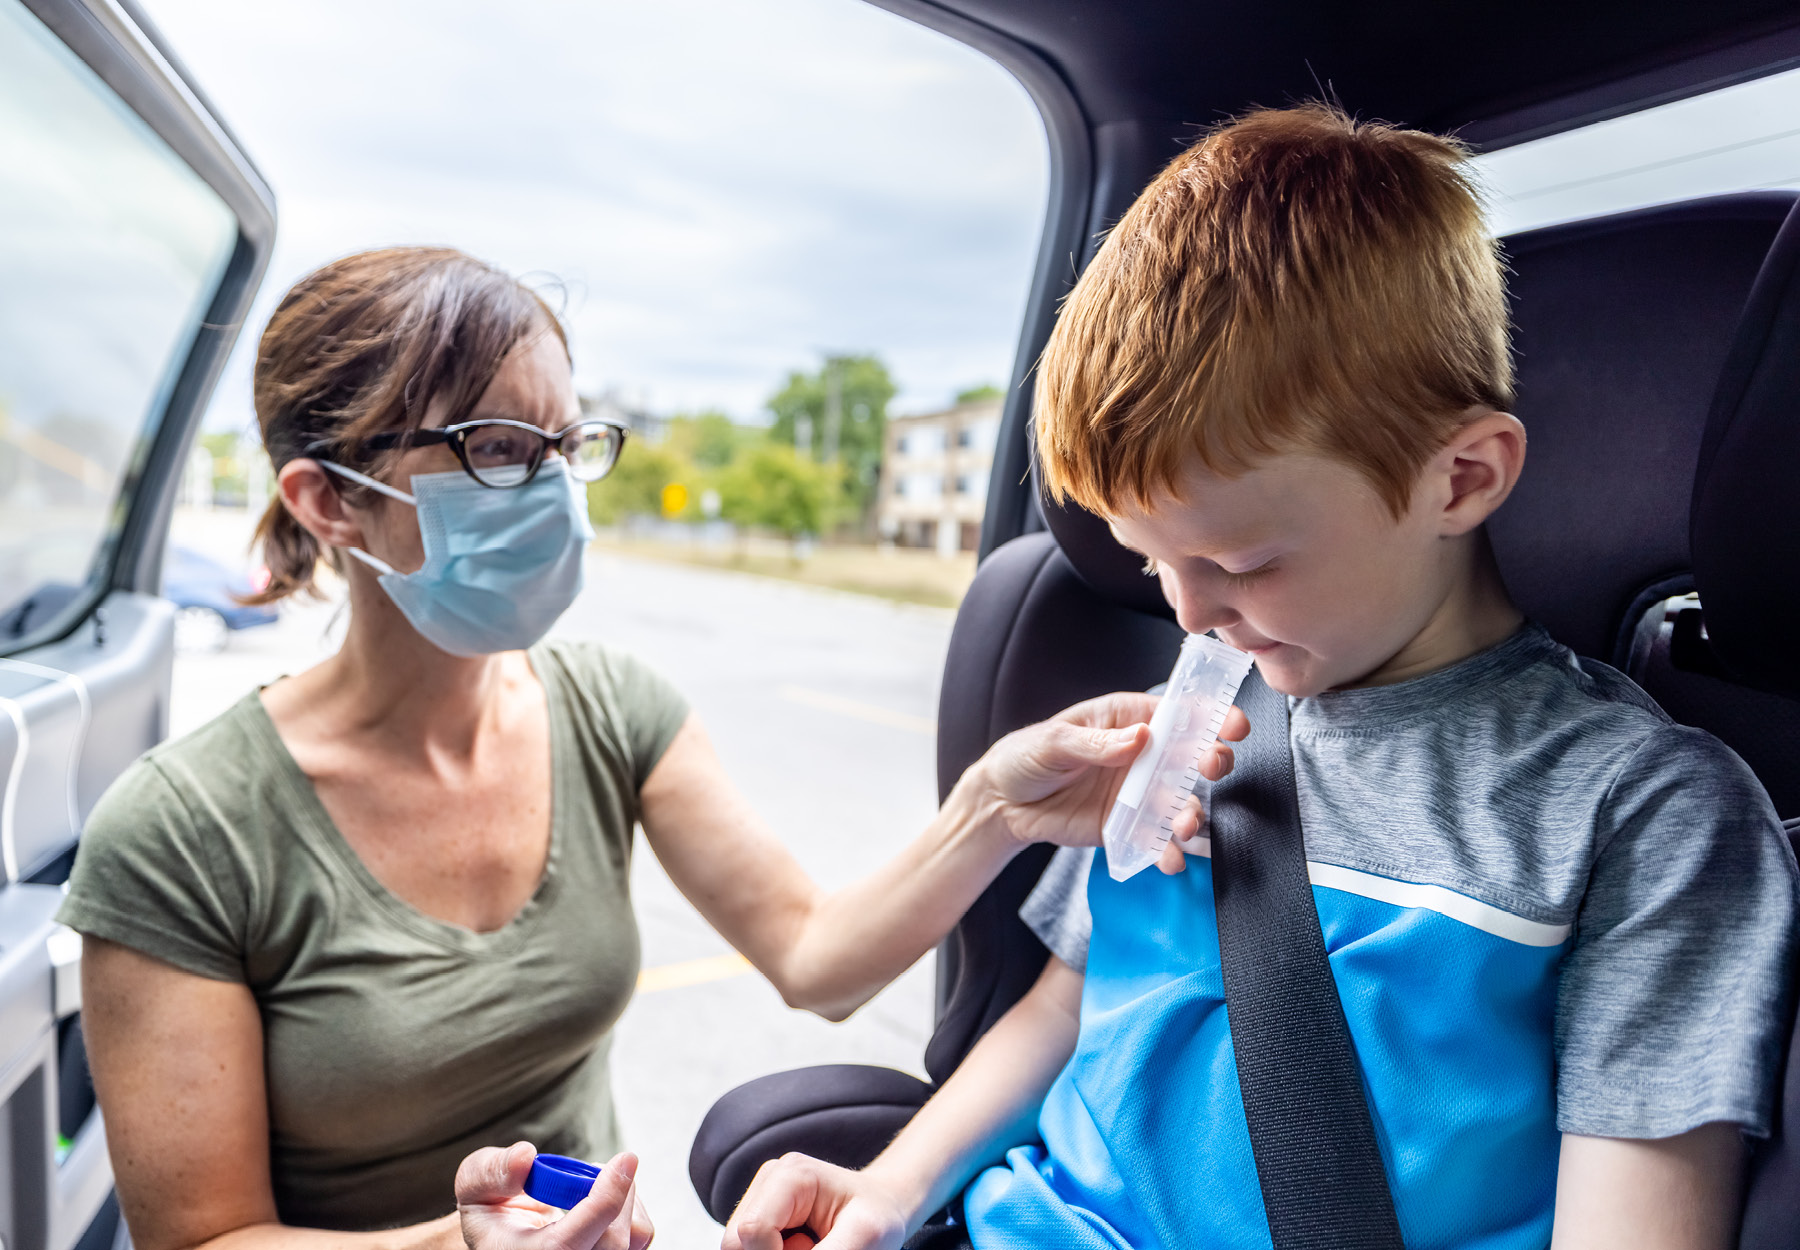 Mother in a mask is getting a saliva sample from her son for COVID-19 testing who is sitting in a car seat in a vehicle. iStock image.